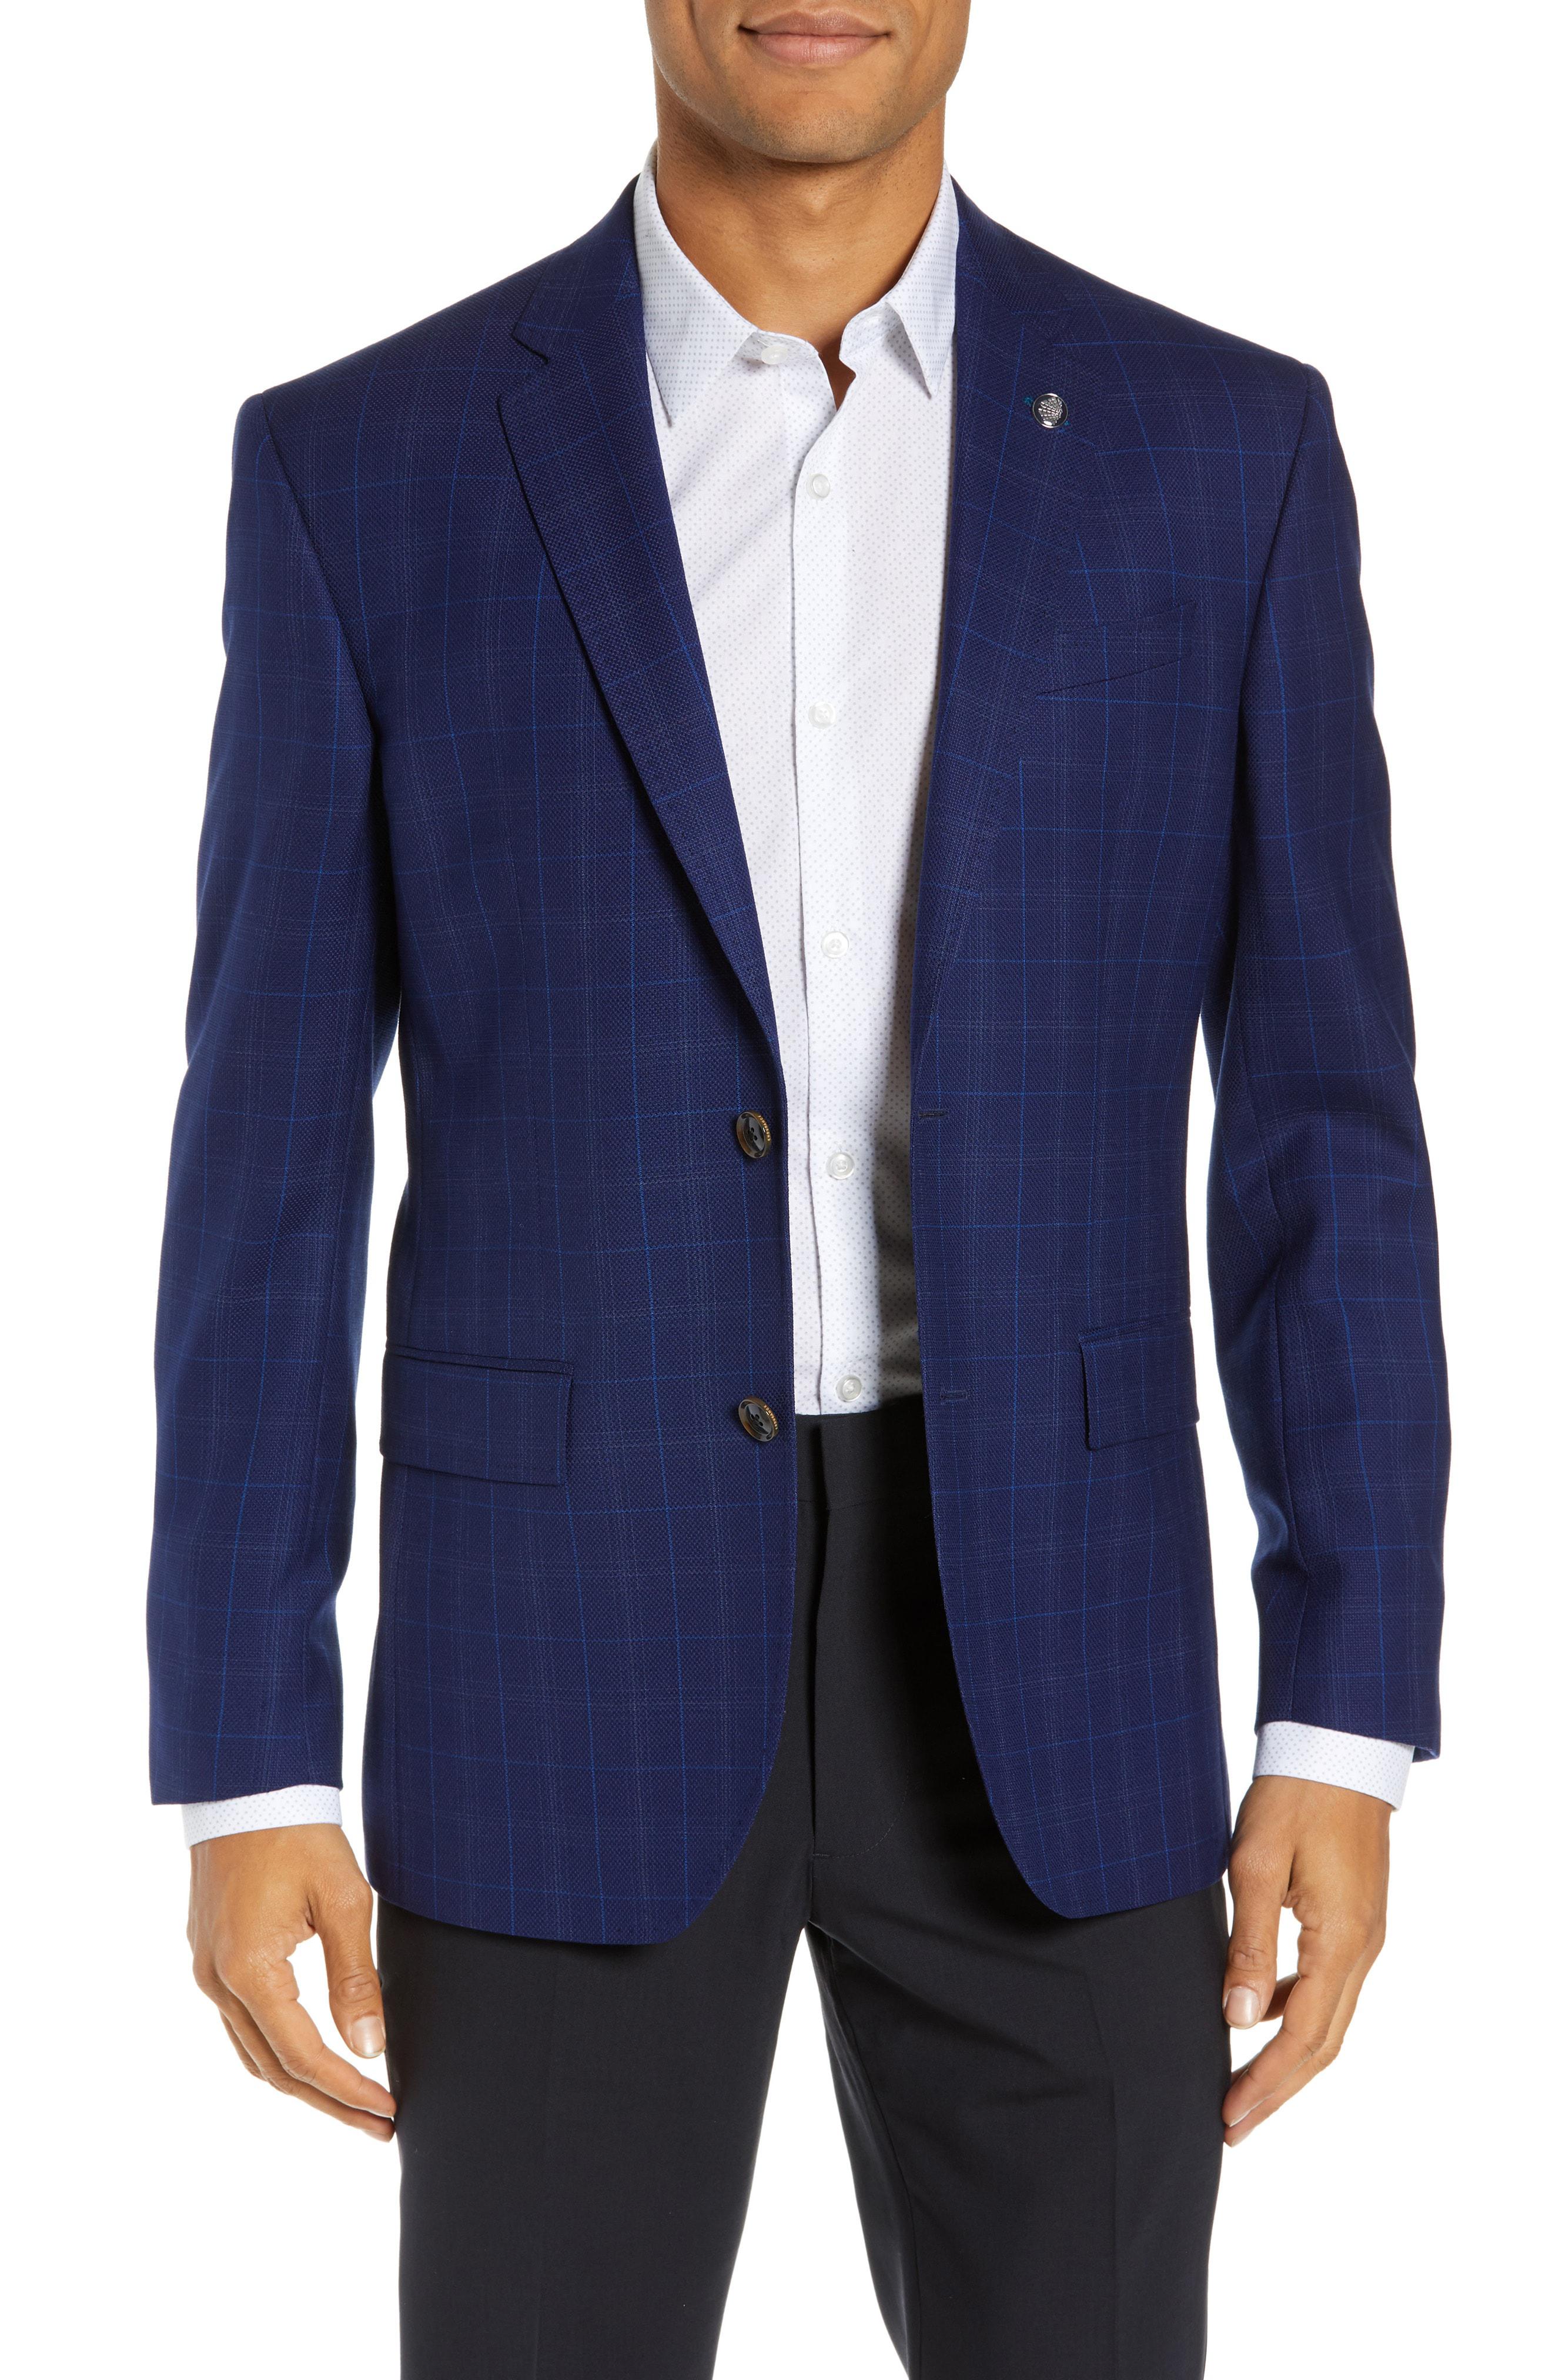 Lyst - Ted Baker Jay Trim Fit Plaid Wool Sport Coat in Blue for Men